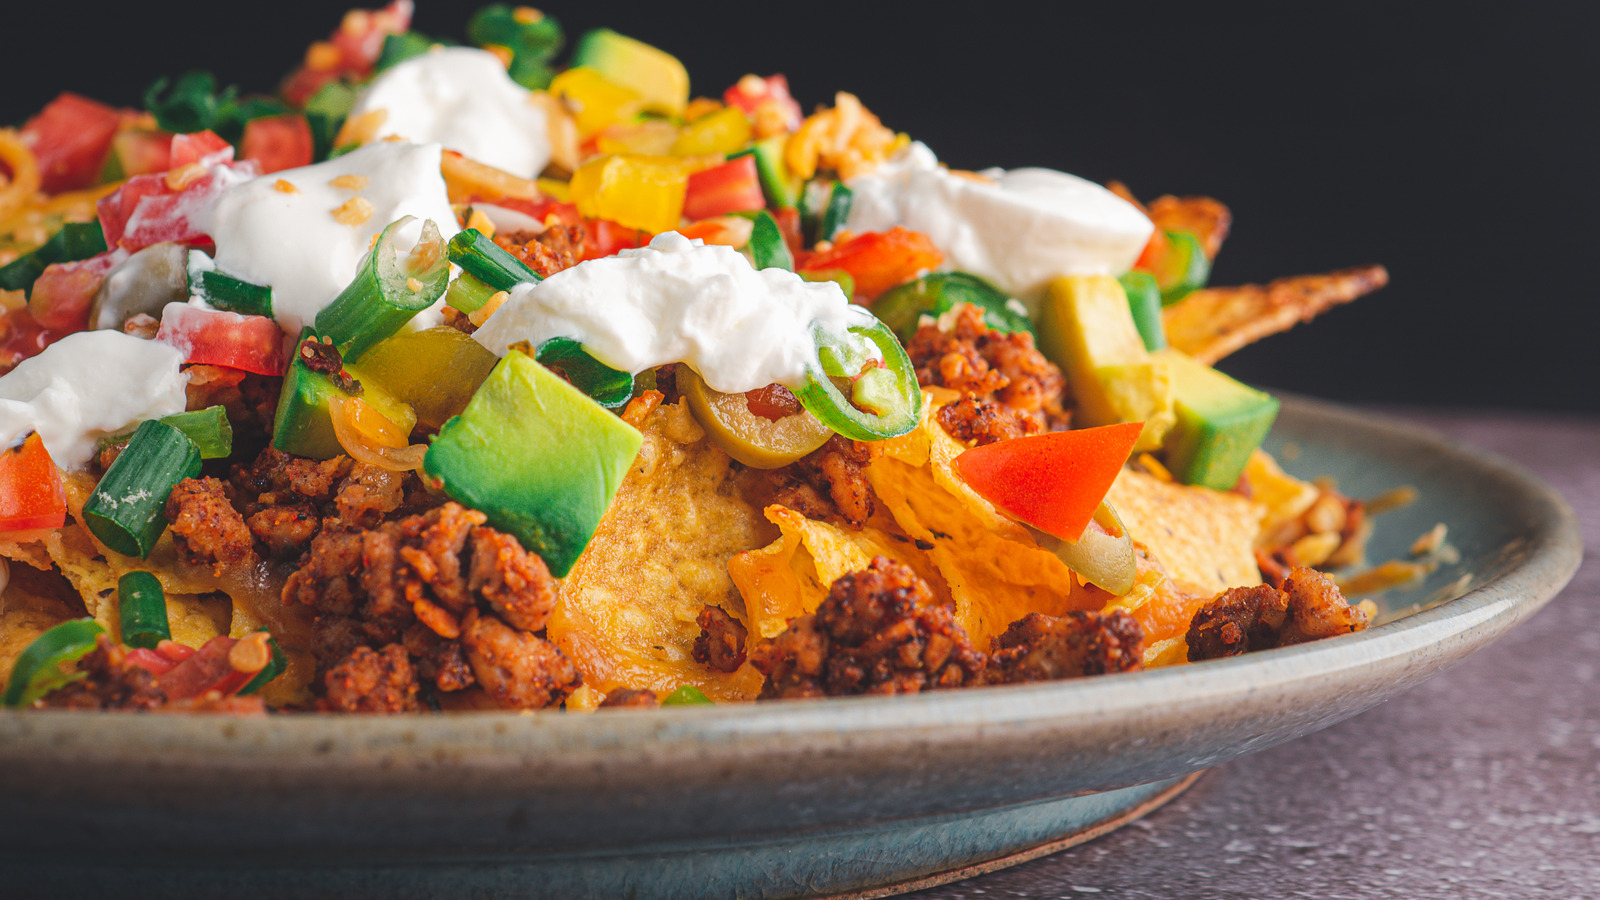 https://www.tastingtable.com/img/gallery/heres-how-you-should-be-reheating-nachos/l-intro-1644823582.jpg